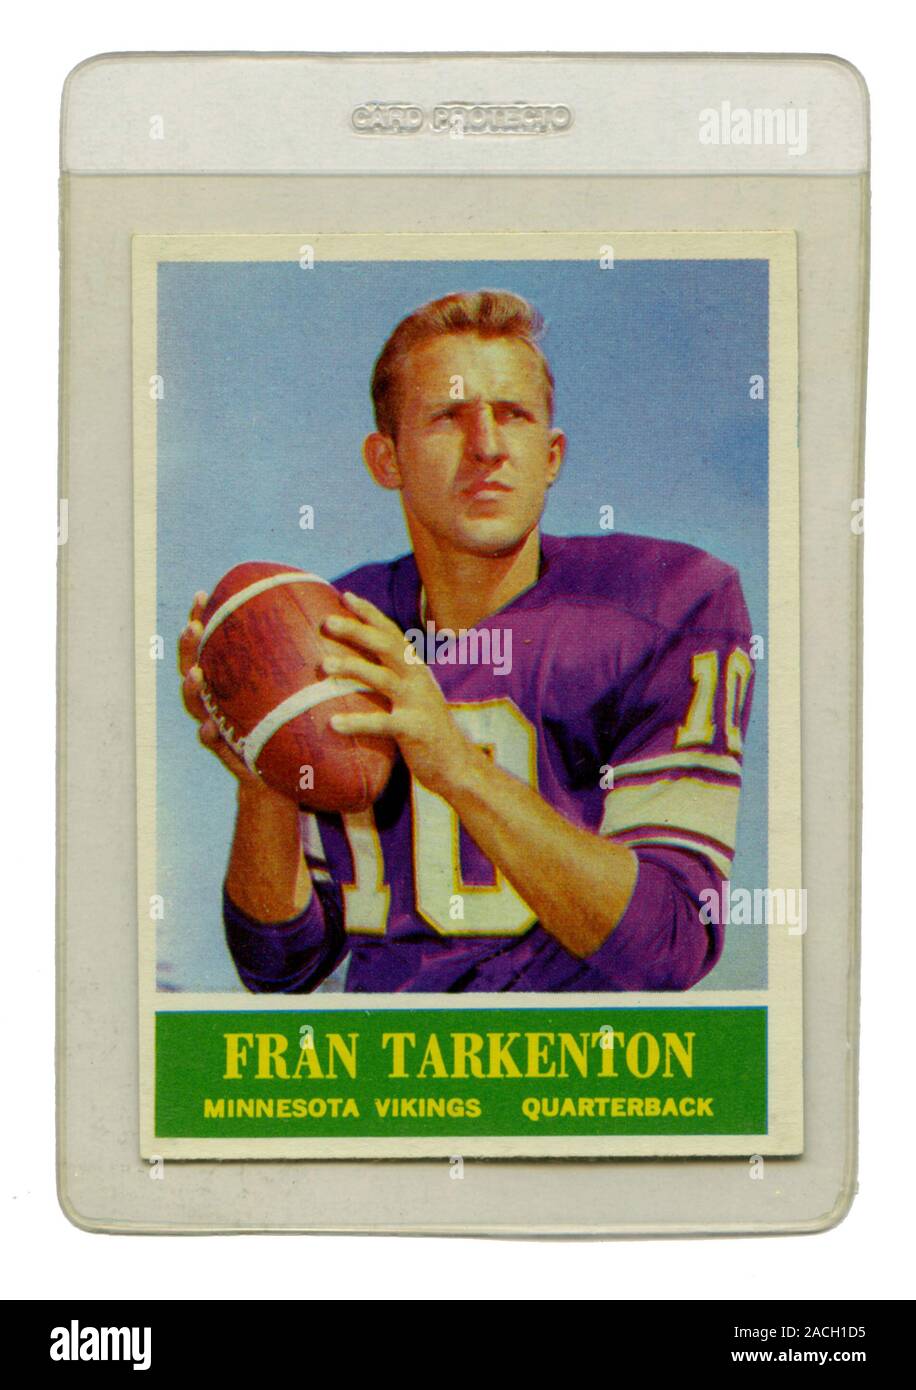 Classic football card depicting Fran Tarkenton the quarterback with the Minnesota Vikings issued by Philadelphia Gum in 1964. Stock Photo